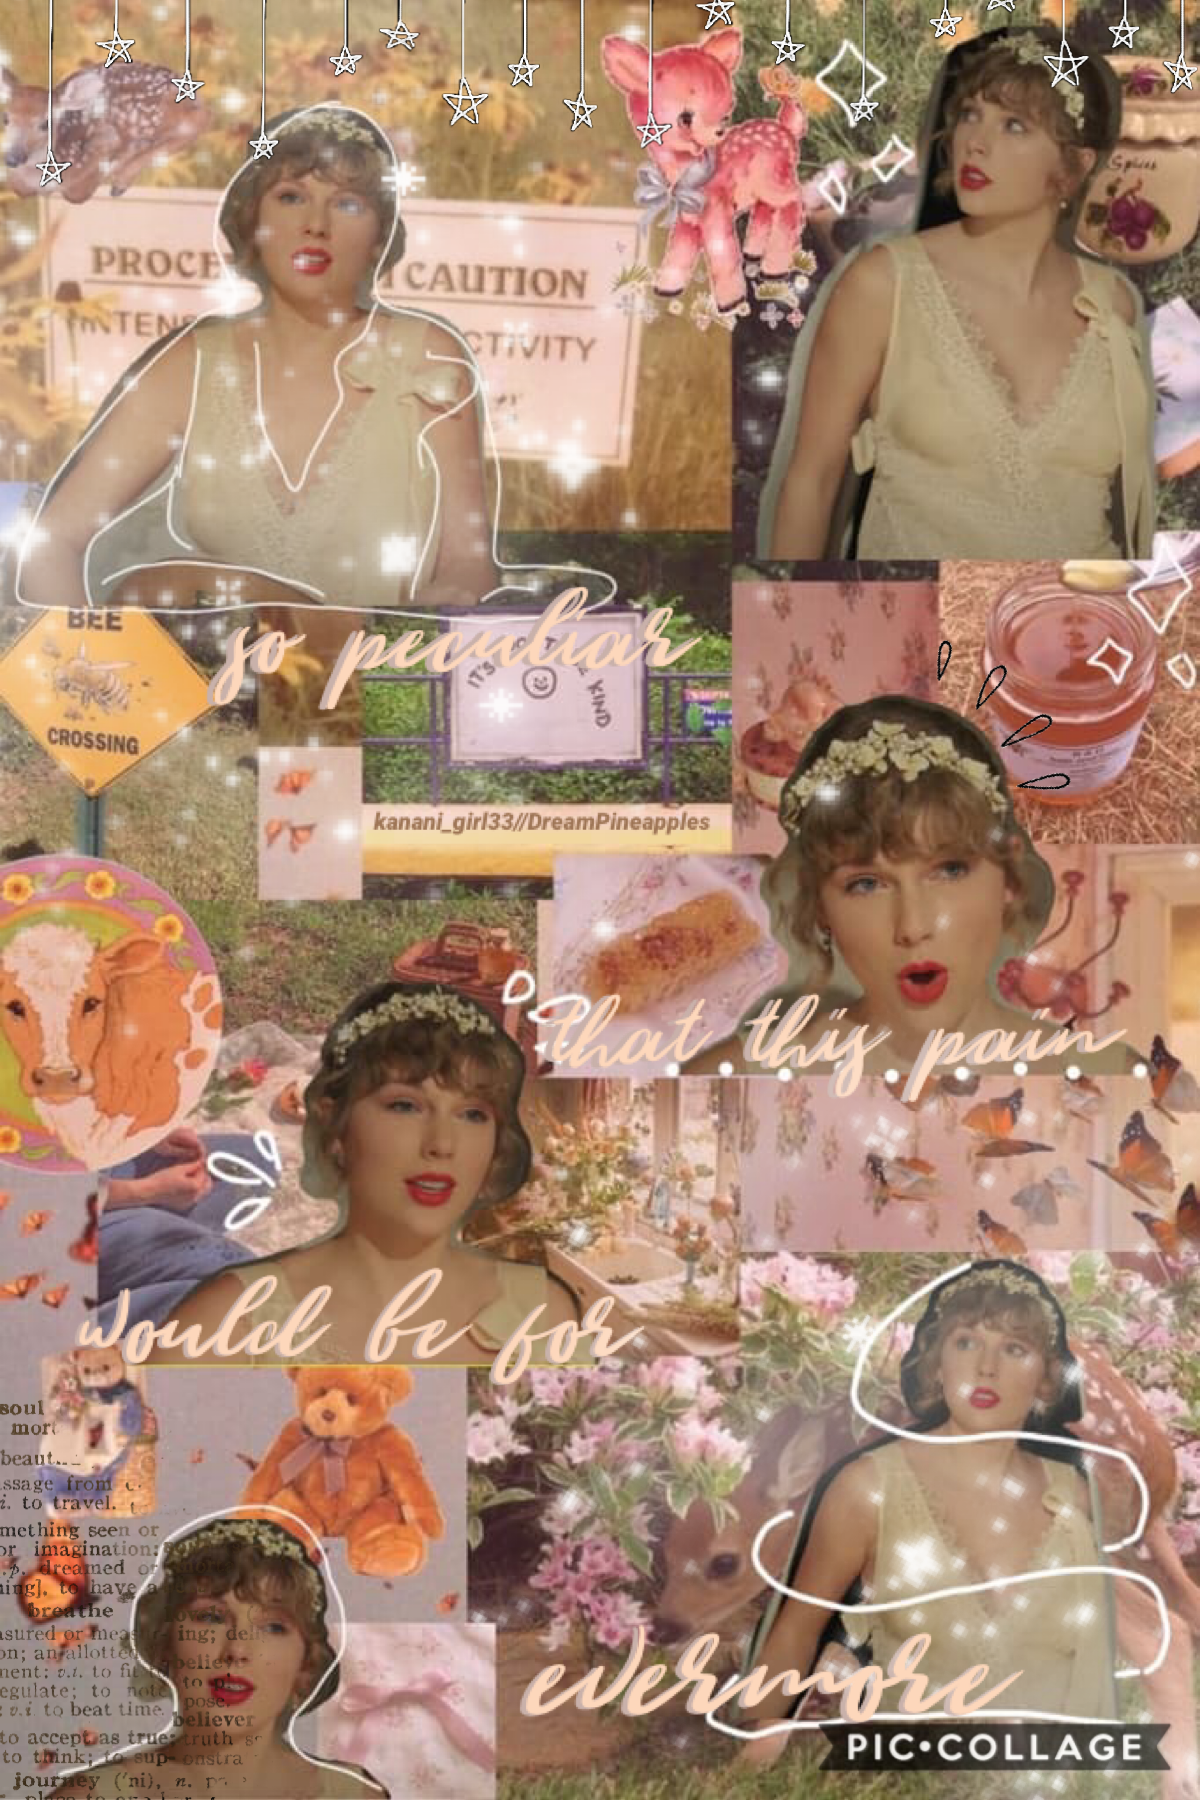 🌸tap🌸
december 13, 2020
today’s taylor’s 31st birthday!! here’s a special edit collage with the gorgeous DreamPineapples!! u guys really need to check out her account 💗 qotd: christmas wishlist? 